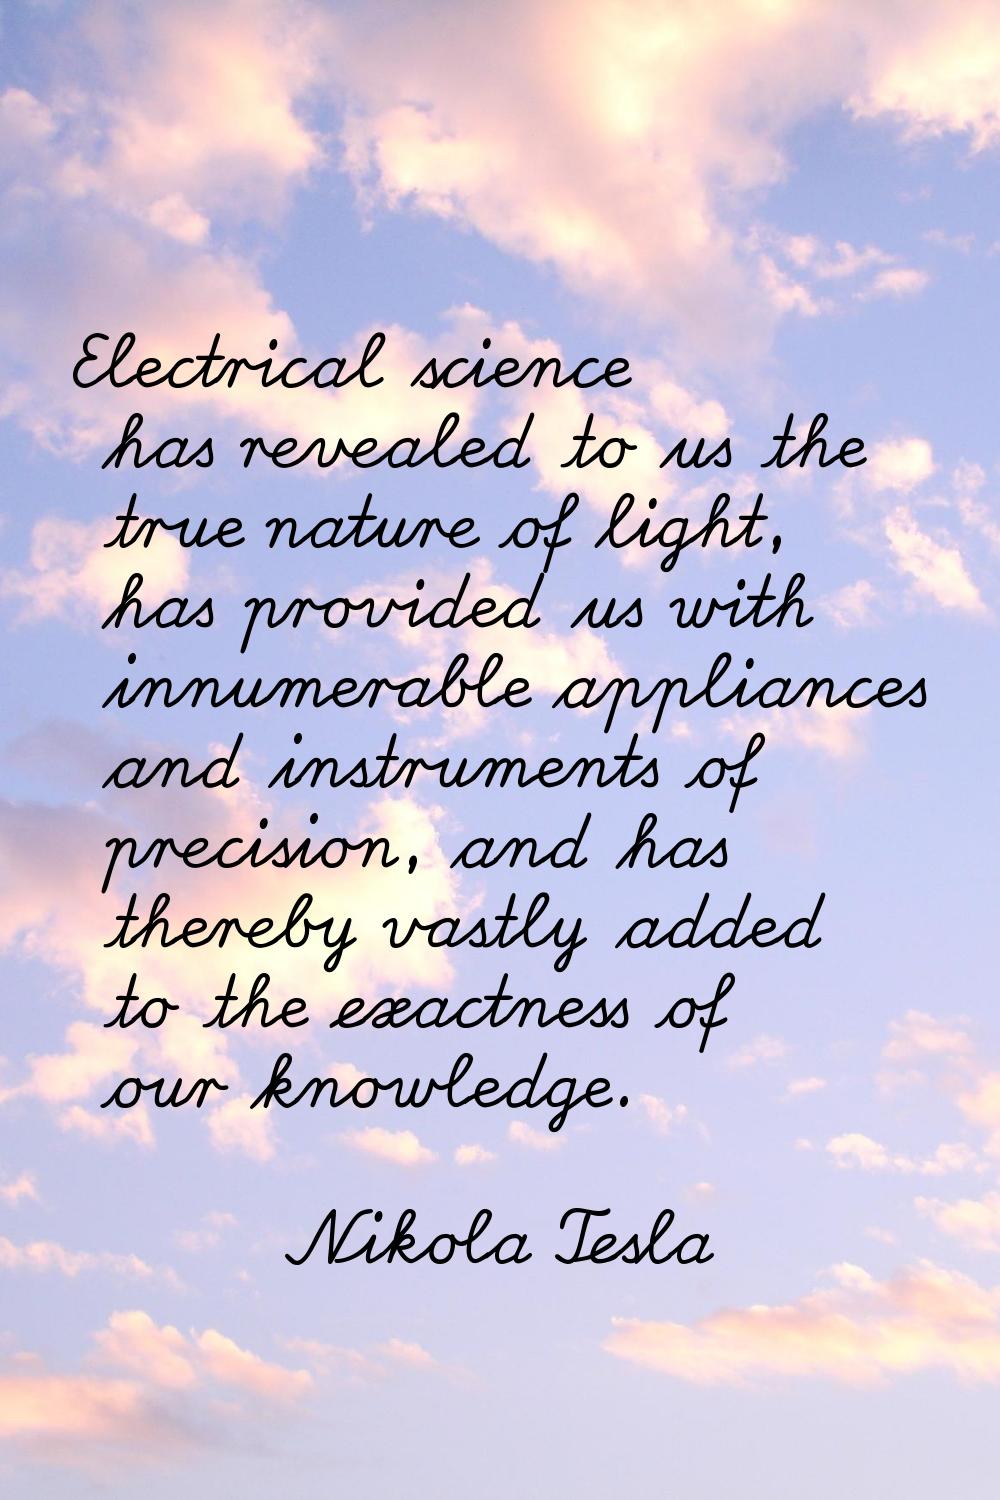 Electrical science has revealed to us the true nature of light, has provided us with innumerable ap